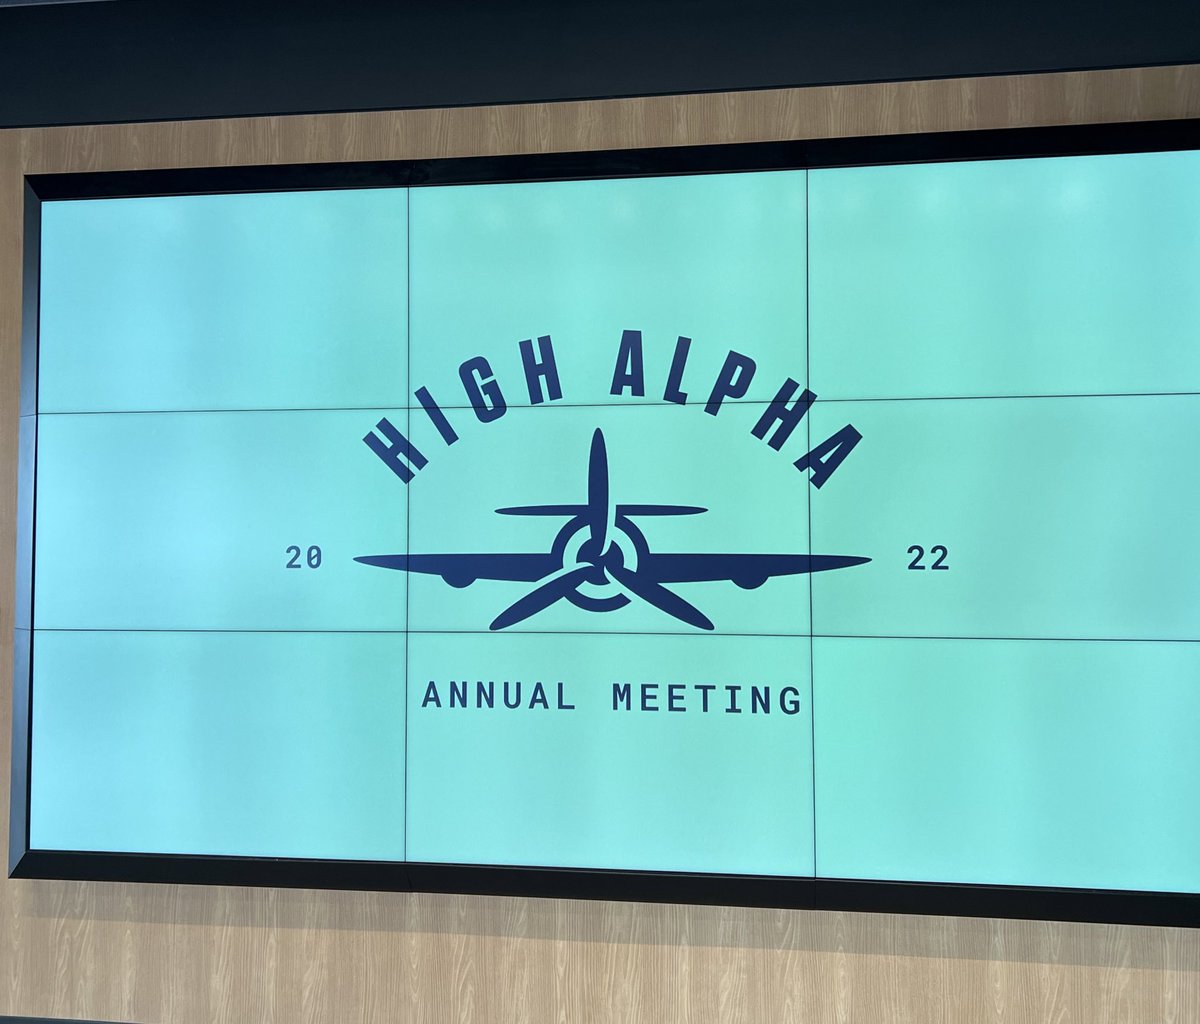 Feeling very energized after our @highalpha annual meeting yesterday. Huge thanks to our amazing investors - for their encouragement, investment and support!